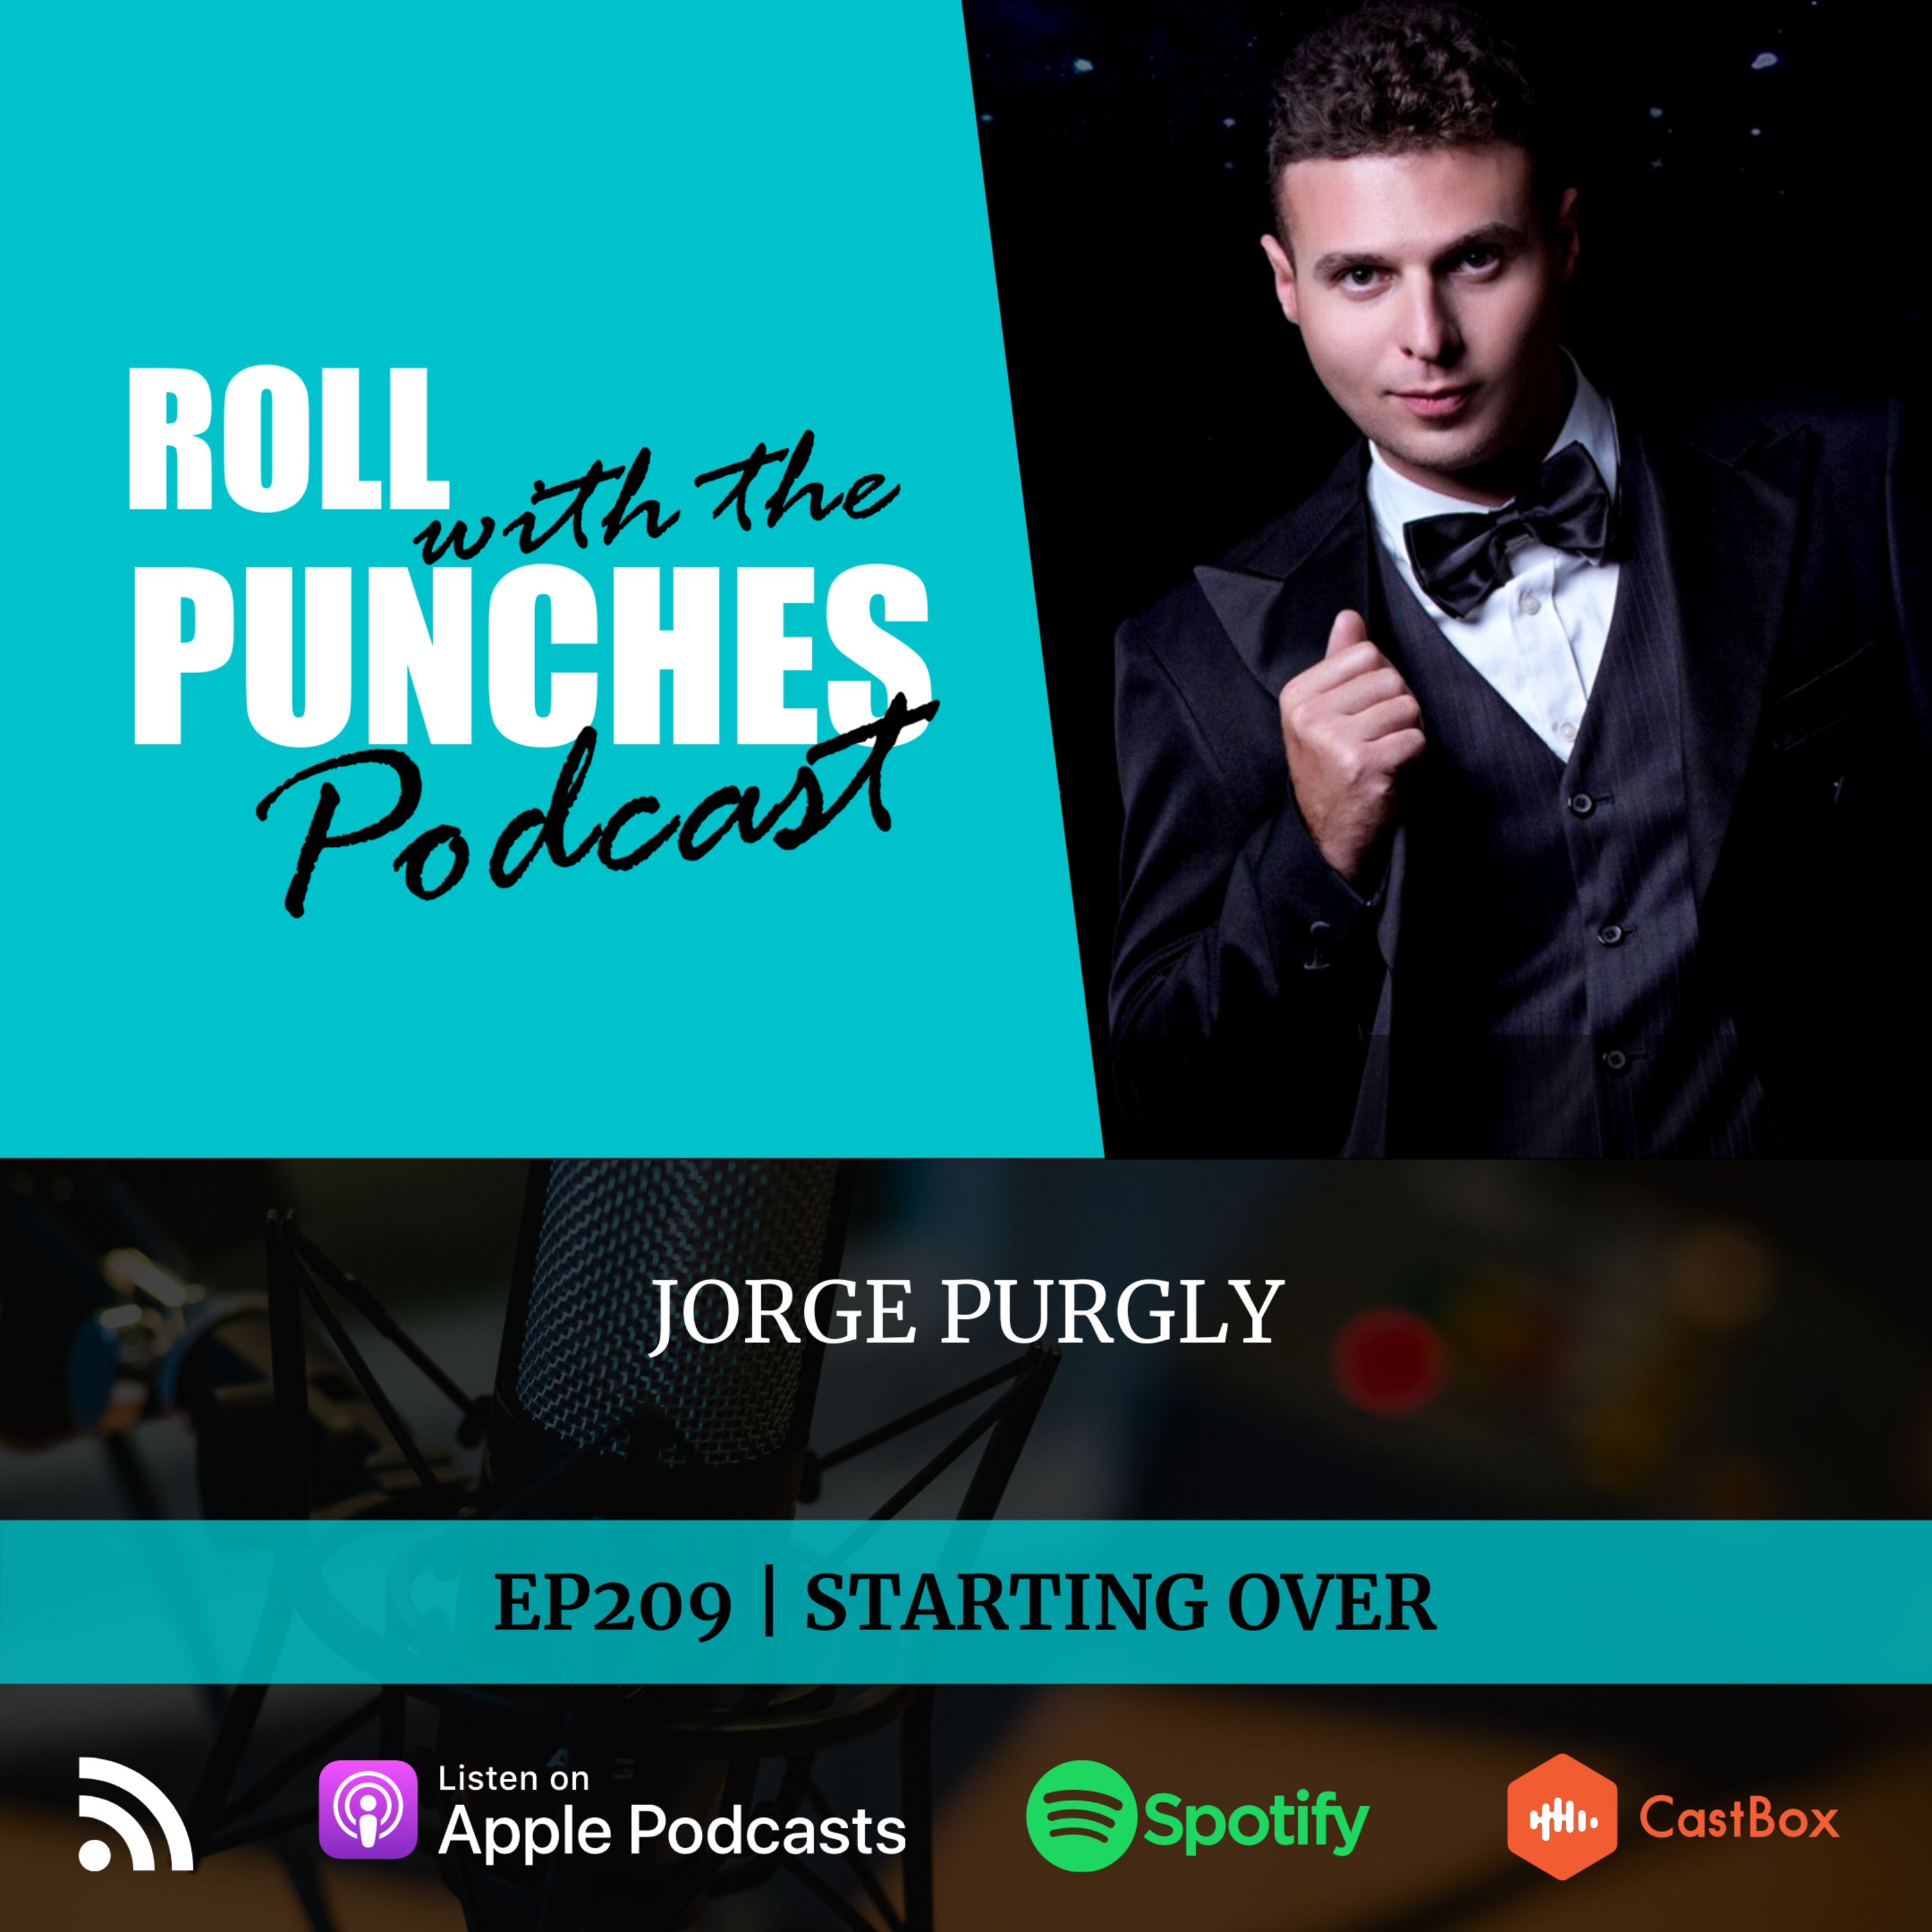 EP209 Starting Over | Jorge Purgly